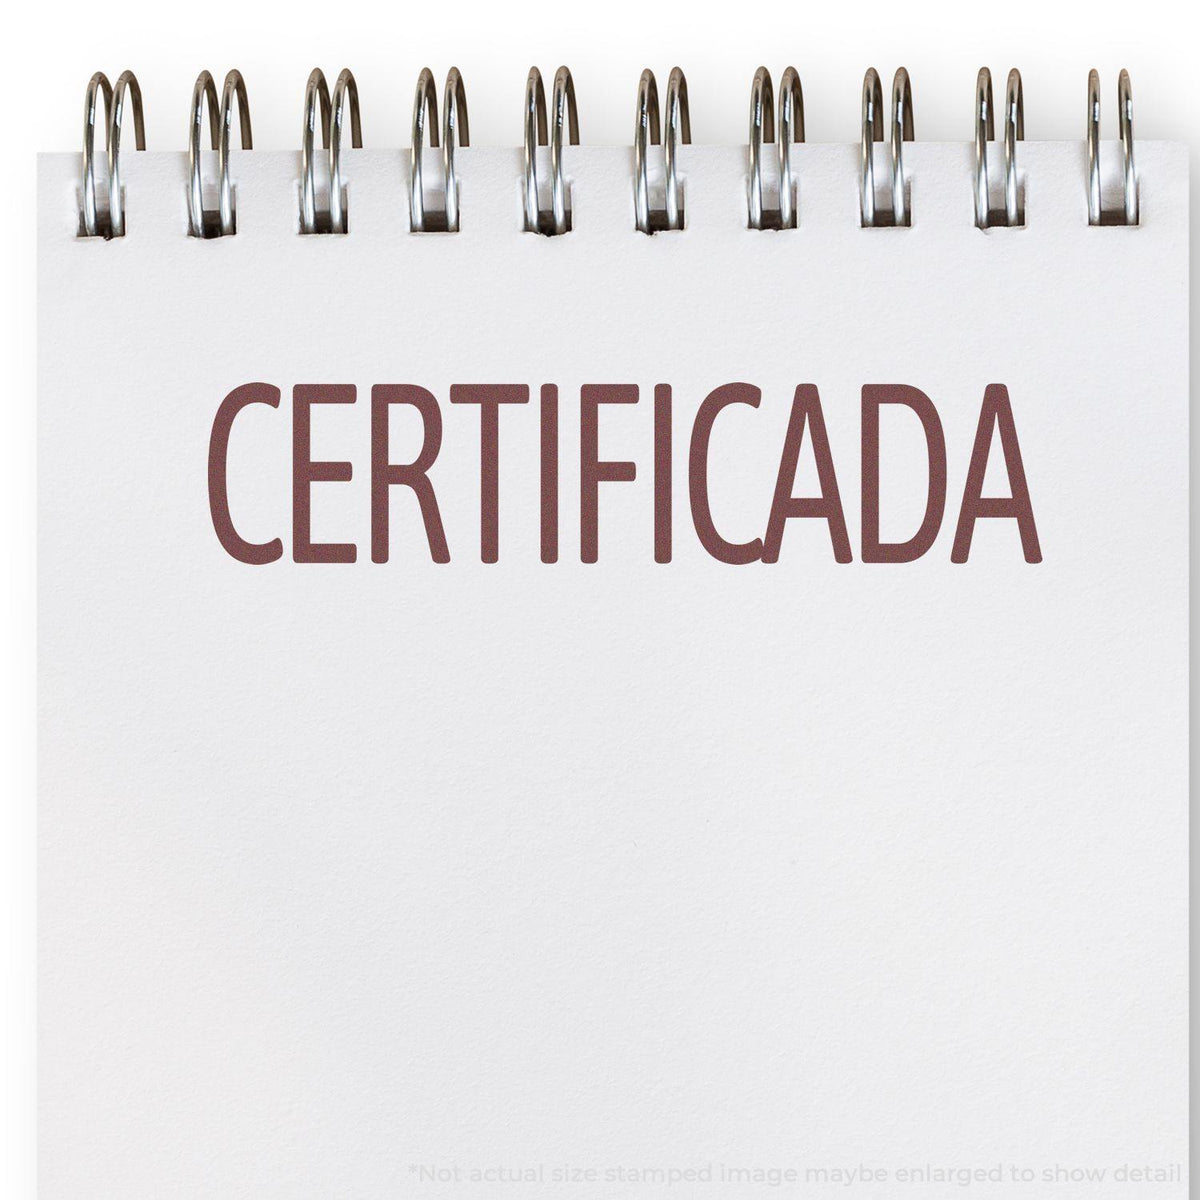 In Use Large Self-Inking Certificada Stamp Image